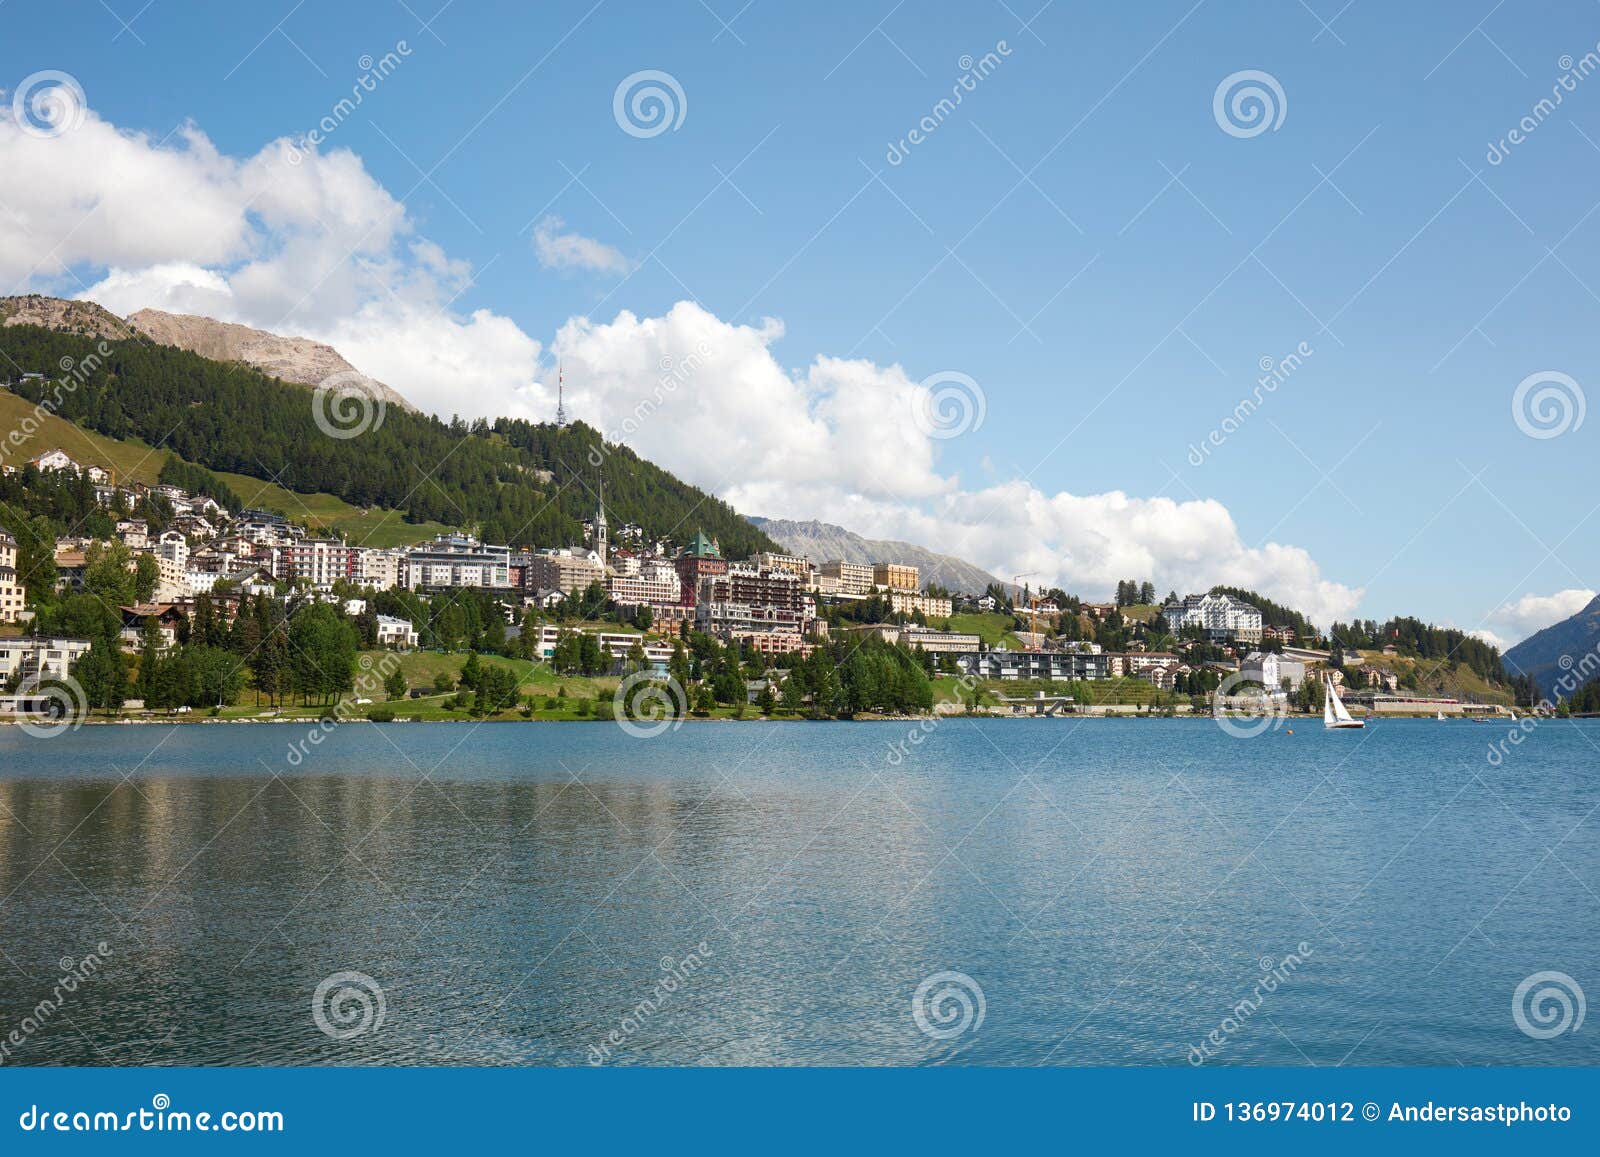 sankt moritz town, lake and sail boat in a sunny summer day in switzerland